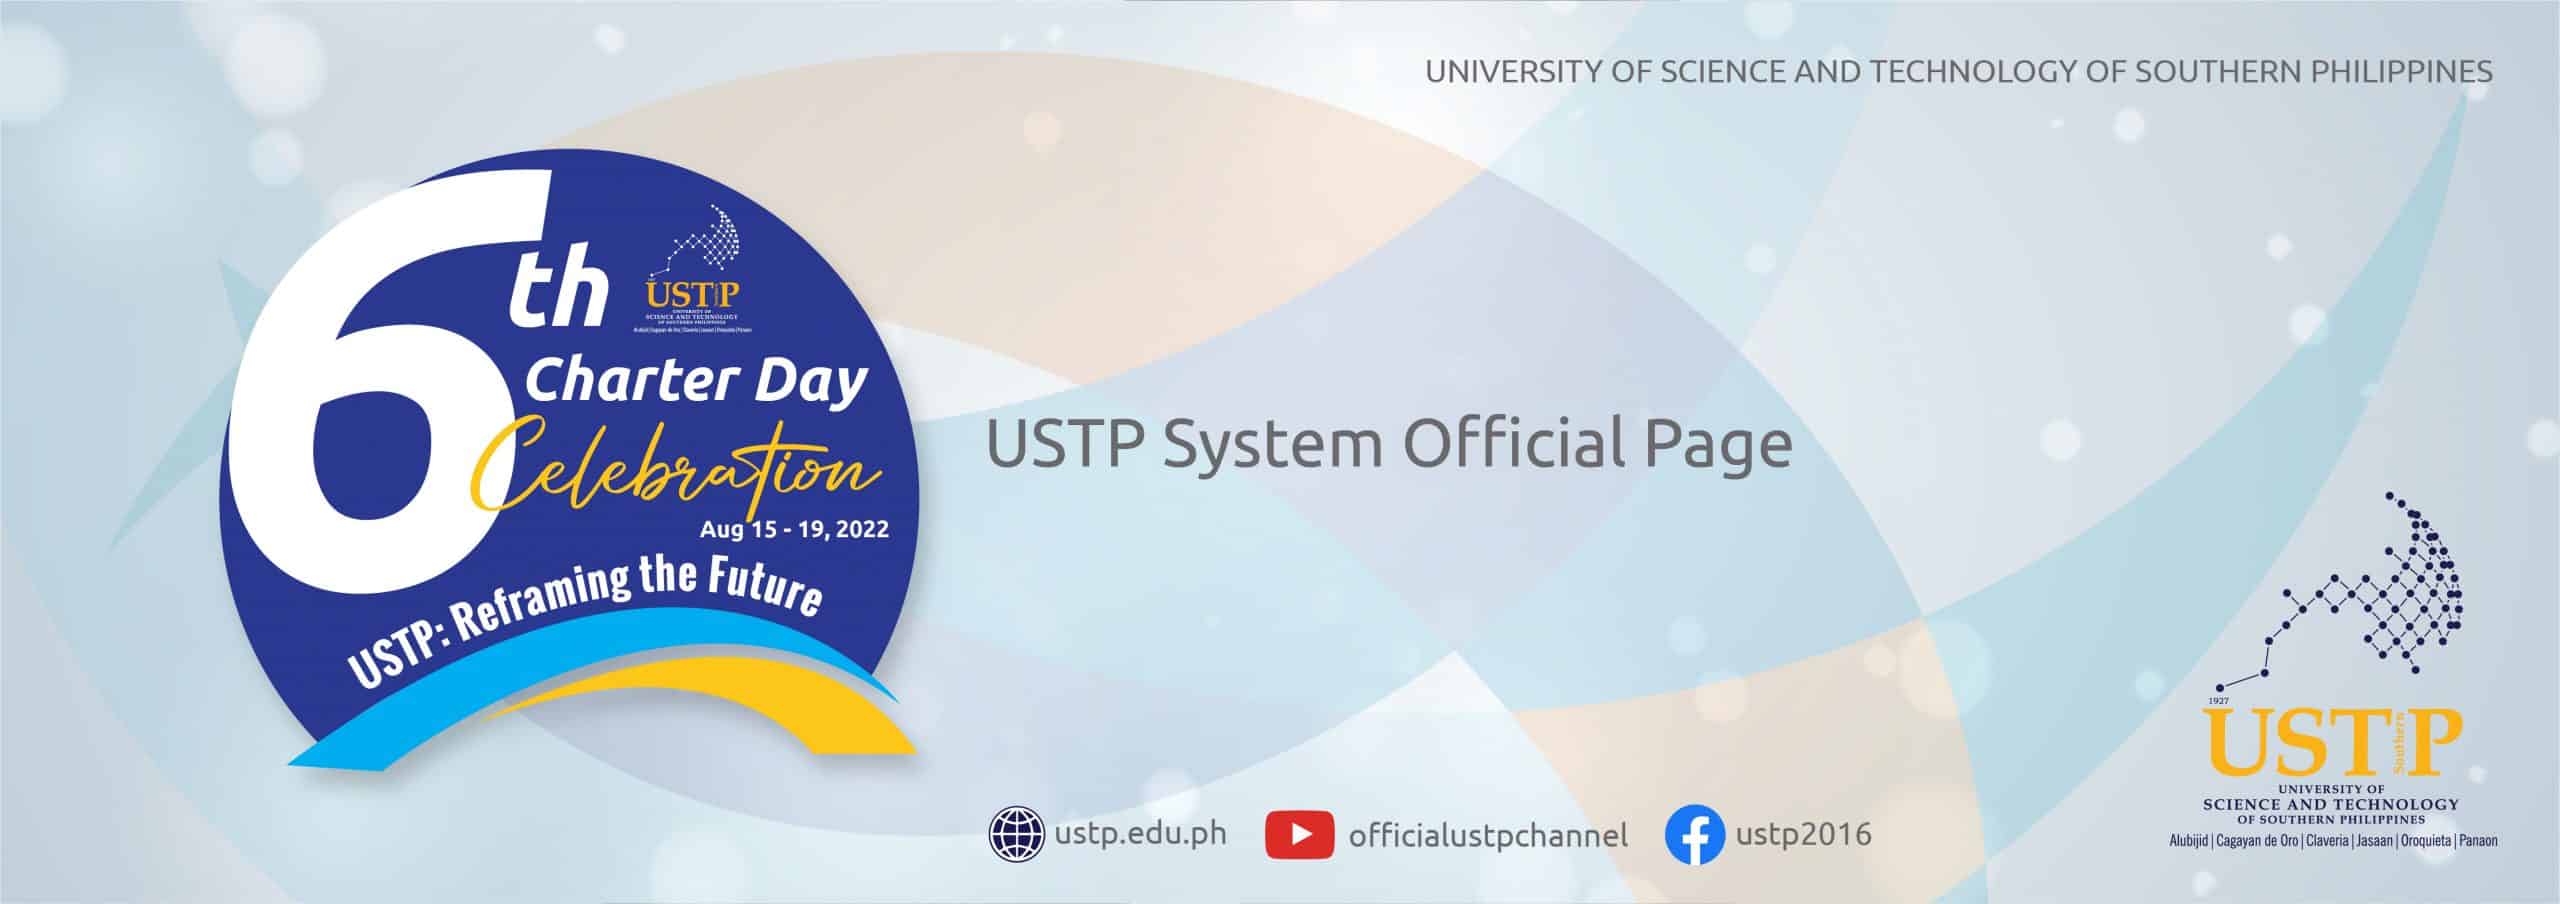 USTP 6th Charter Day Celebration USTP Reframing the Future